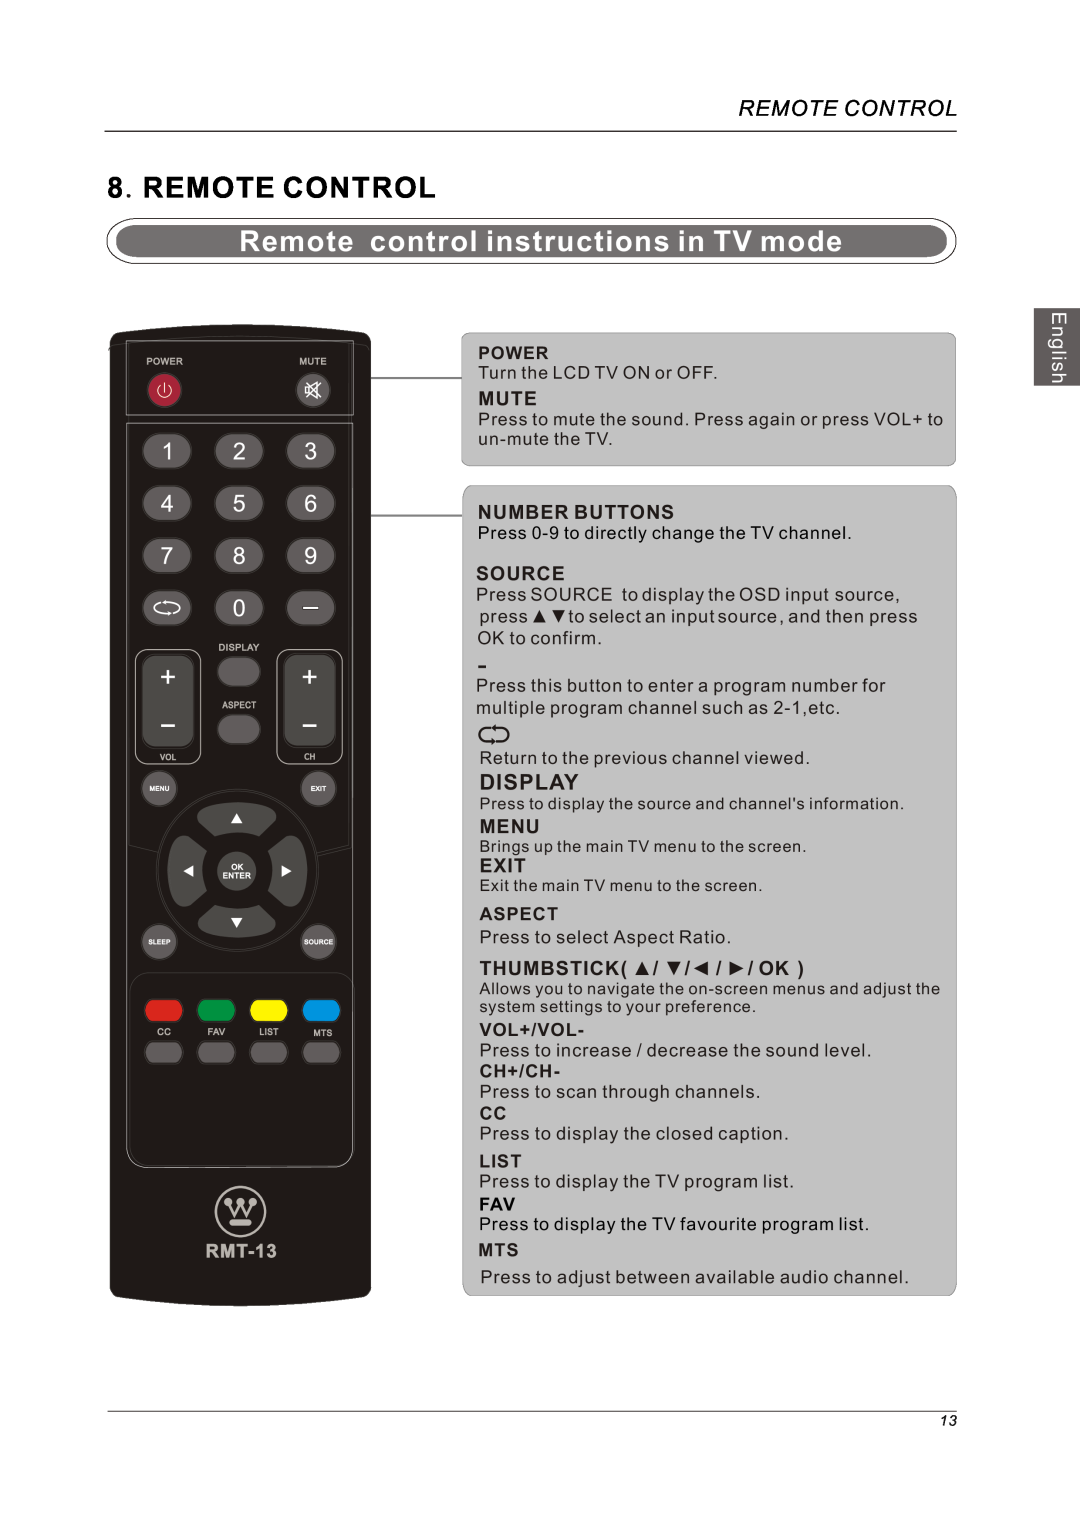 Westinghouse VR-3225 Remote Control, Remote control instructions in TV mode, Display, English, Mute, Number Buttons, Menu 